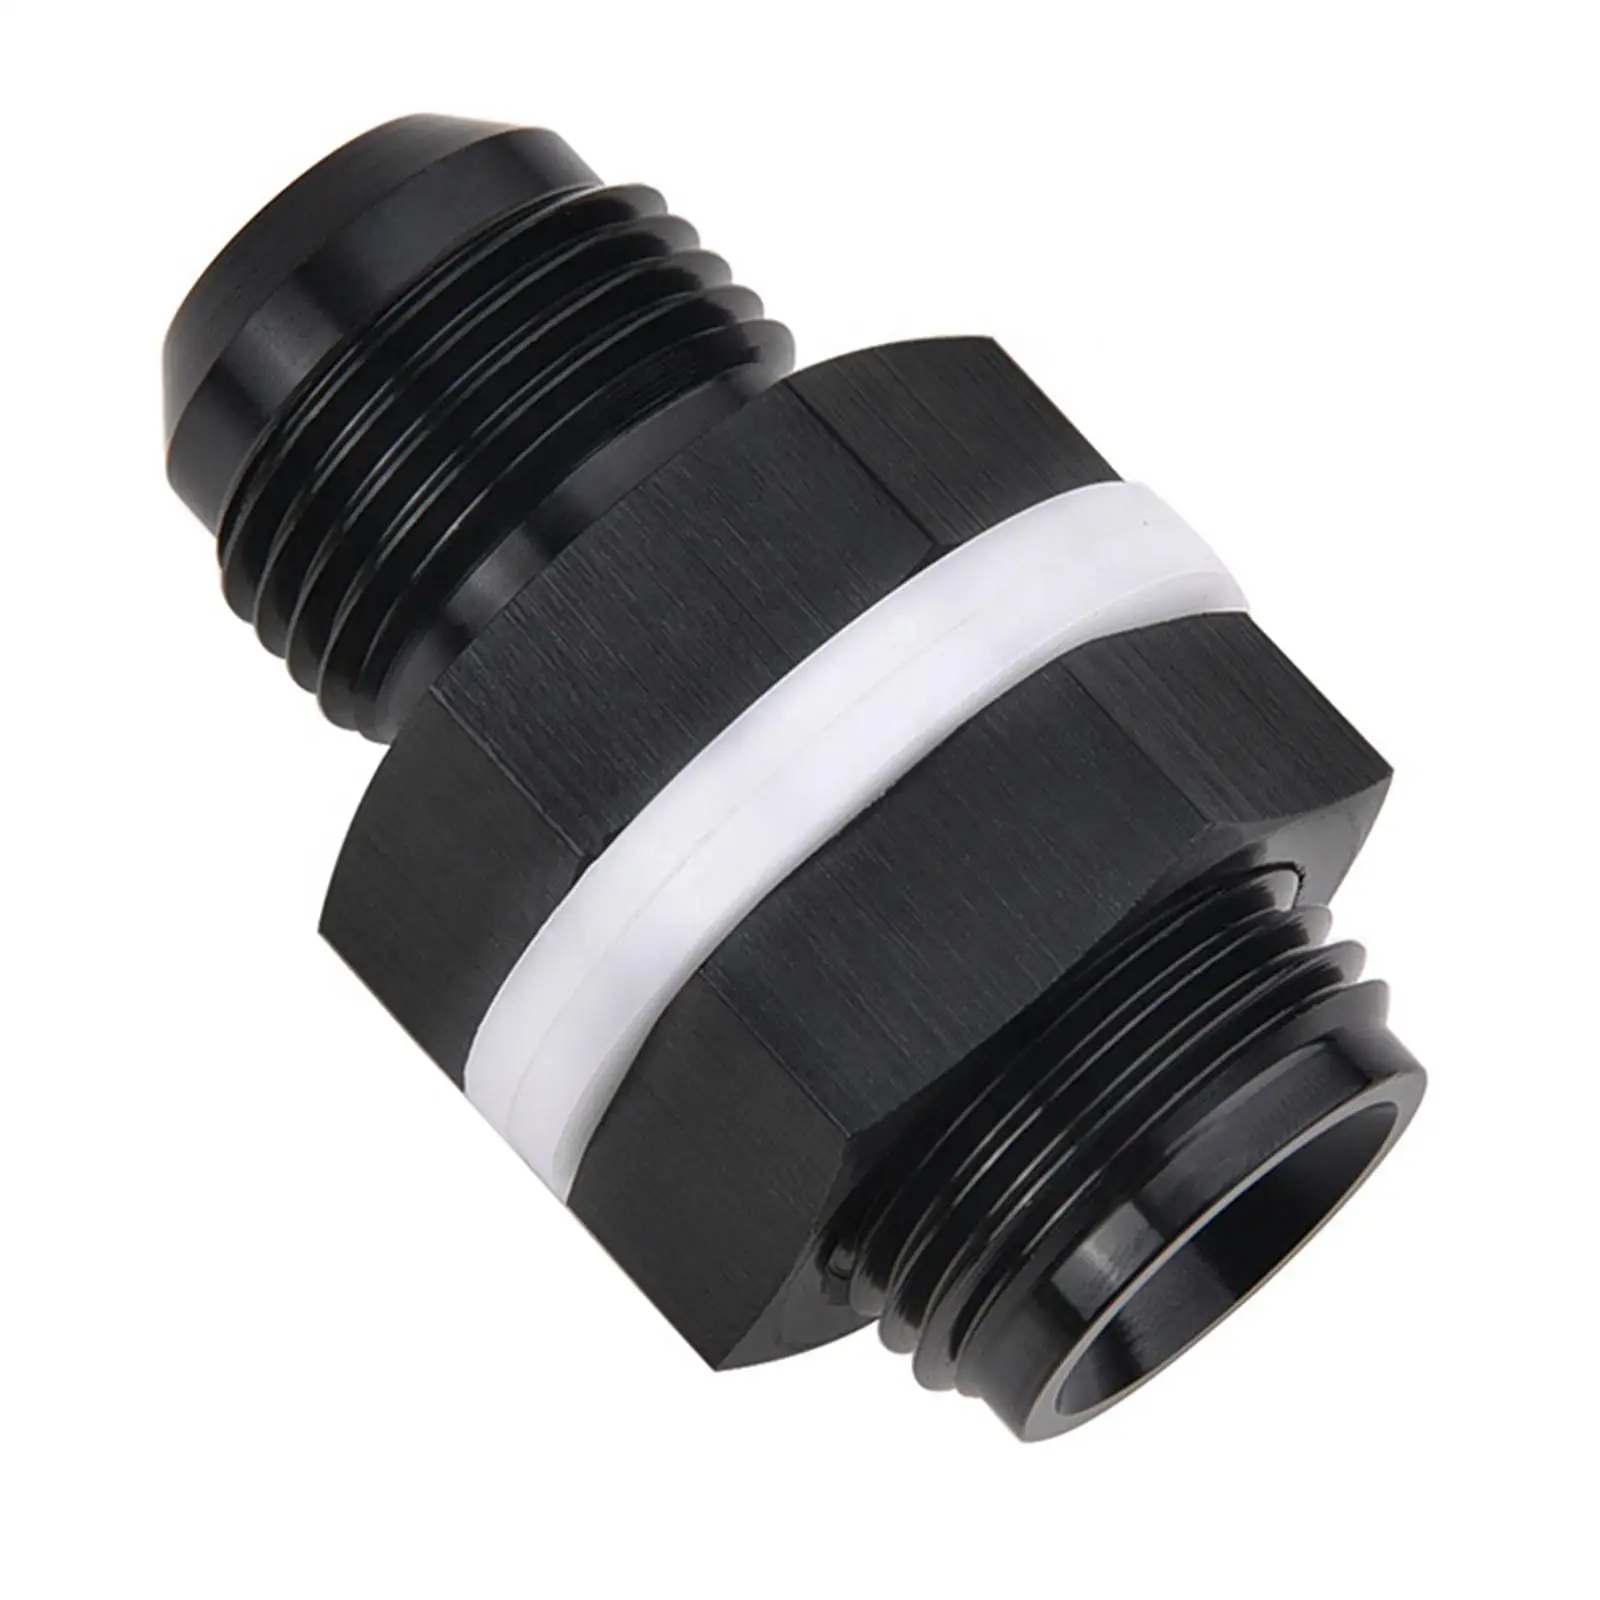 Aluminum Fuel Cell Bulkhead Fitting Adapter Fuel Oil Line Pipe Connector Straight Swivel Adapter Fitting Accessory Replacement